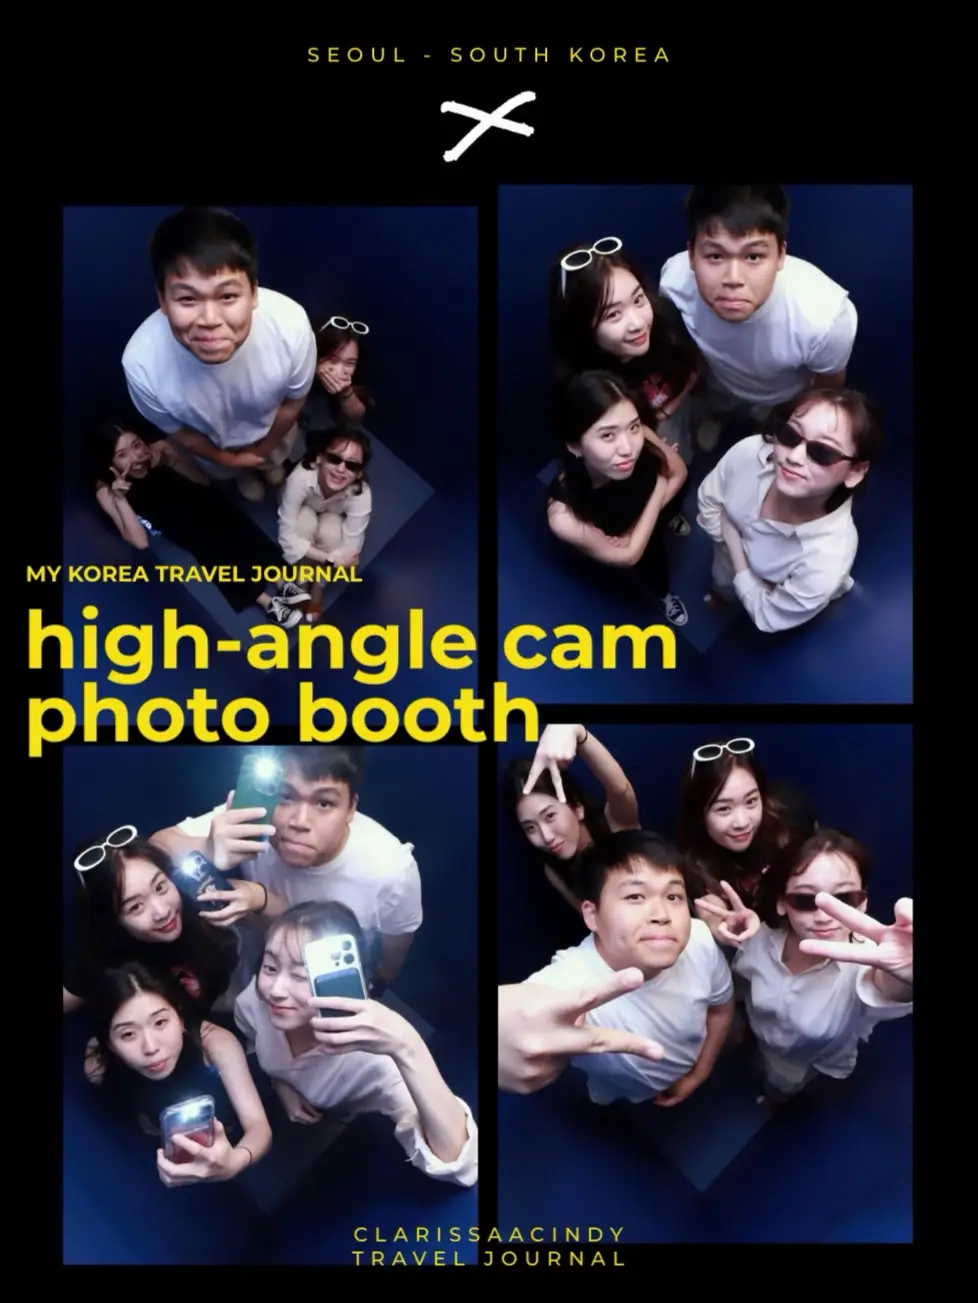 Korean Photo Booths Ultimate Guide - CK Travels